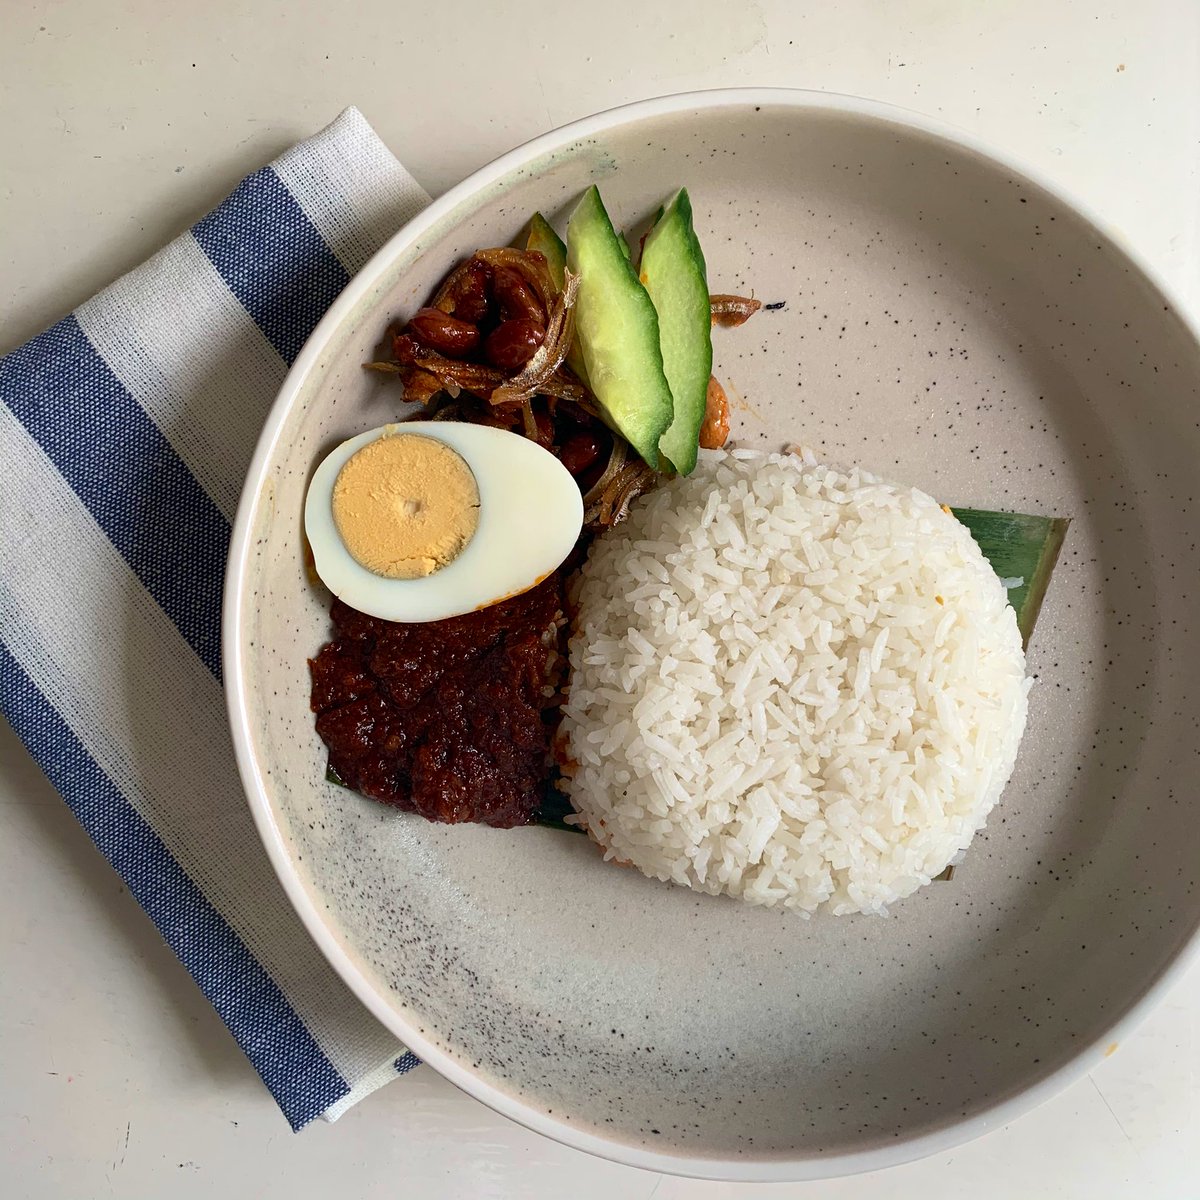 this is nasi lemak which i did not make but picked up from the good people at melb_bungkus on IG! not the spiciest but very very delicious. ugh my mind honestly this was such a good life choice